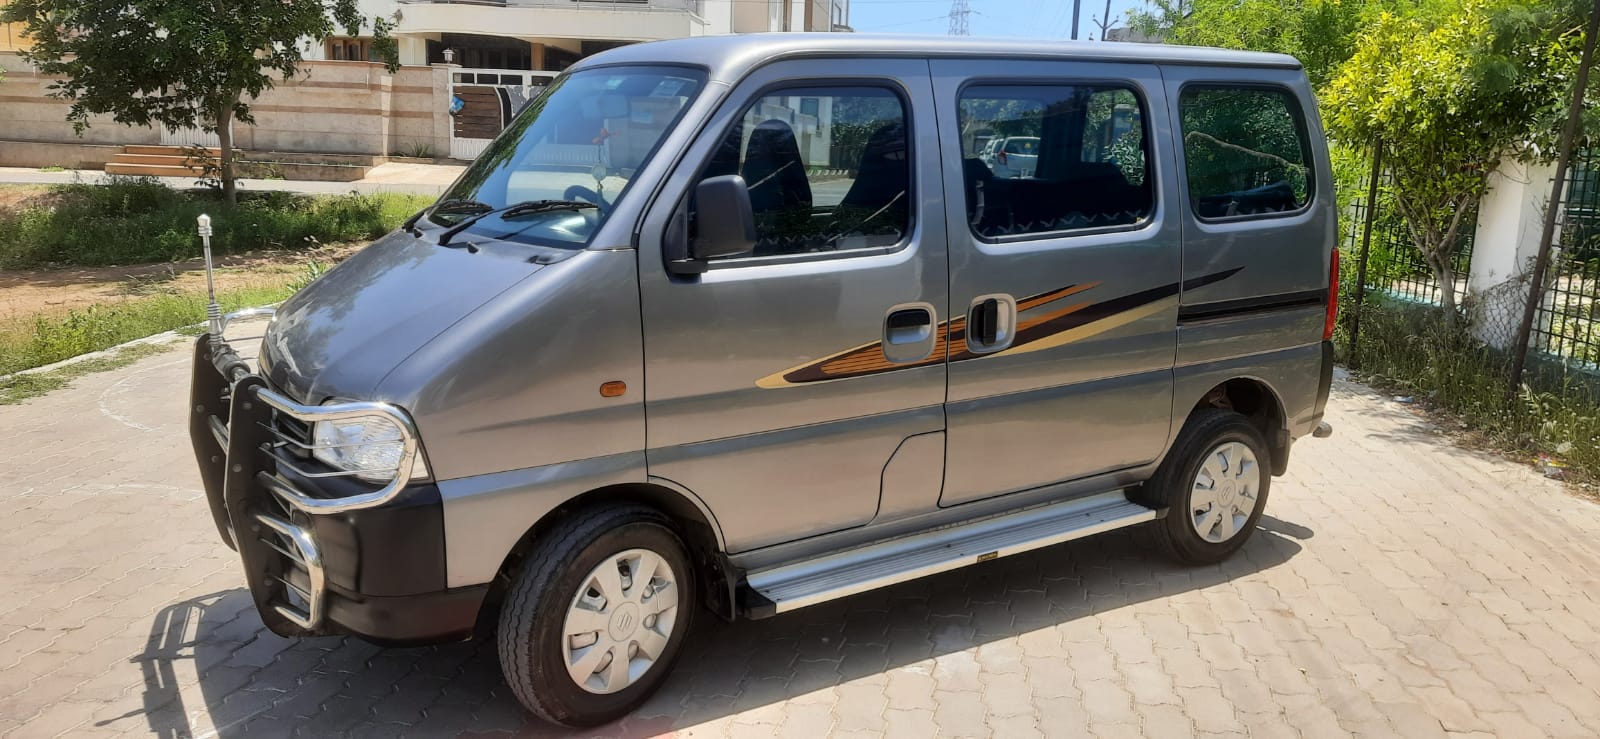 4341-for-sale-Maruthi-Suzuki-Eeco-Petrol-First-Owner-2019-TN-registered-rs-0